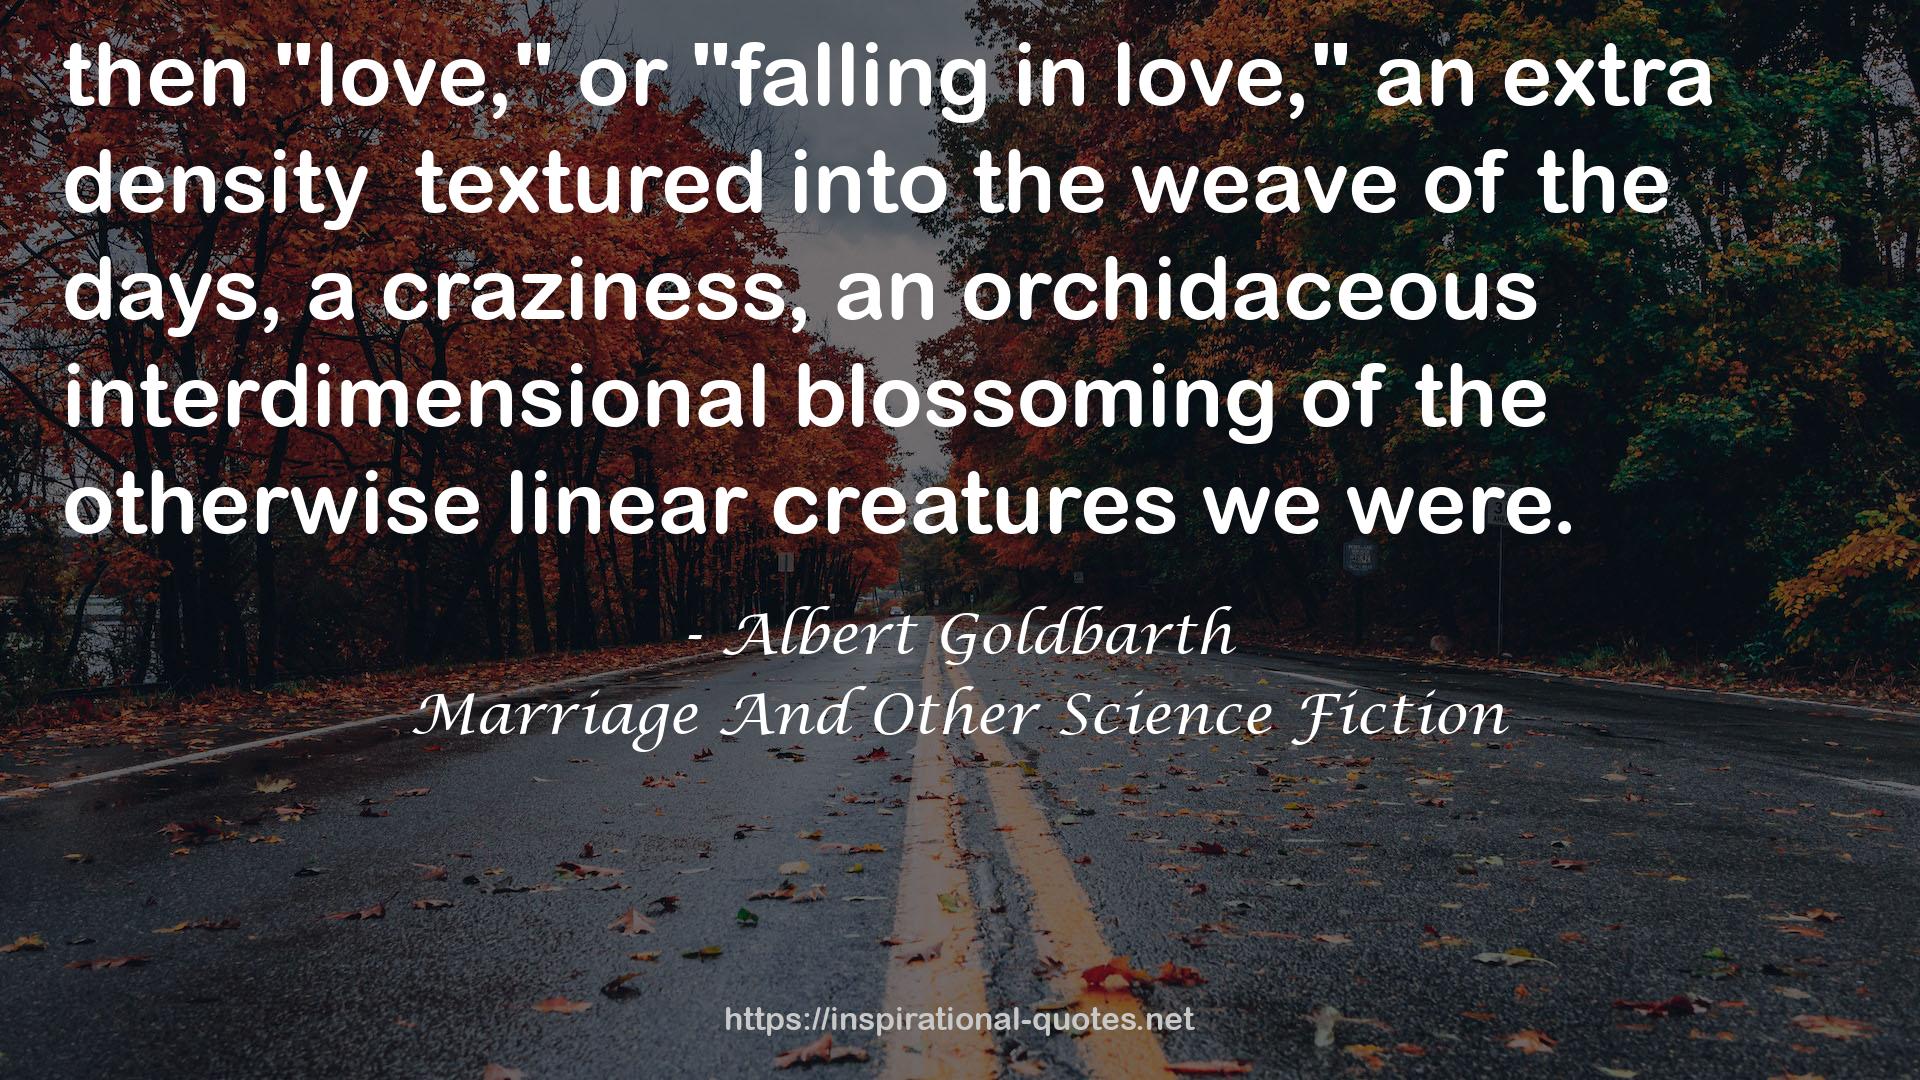 Marriage And Other Science Fiction QUOTES